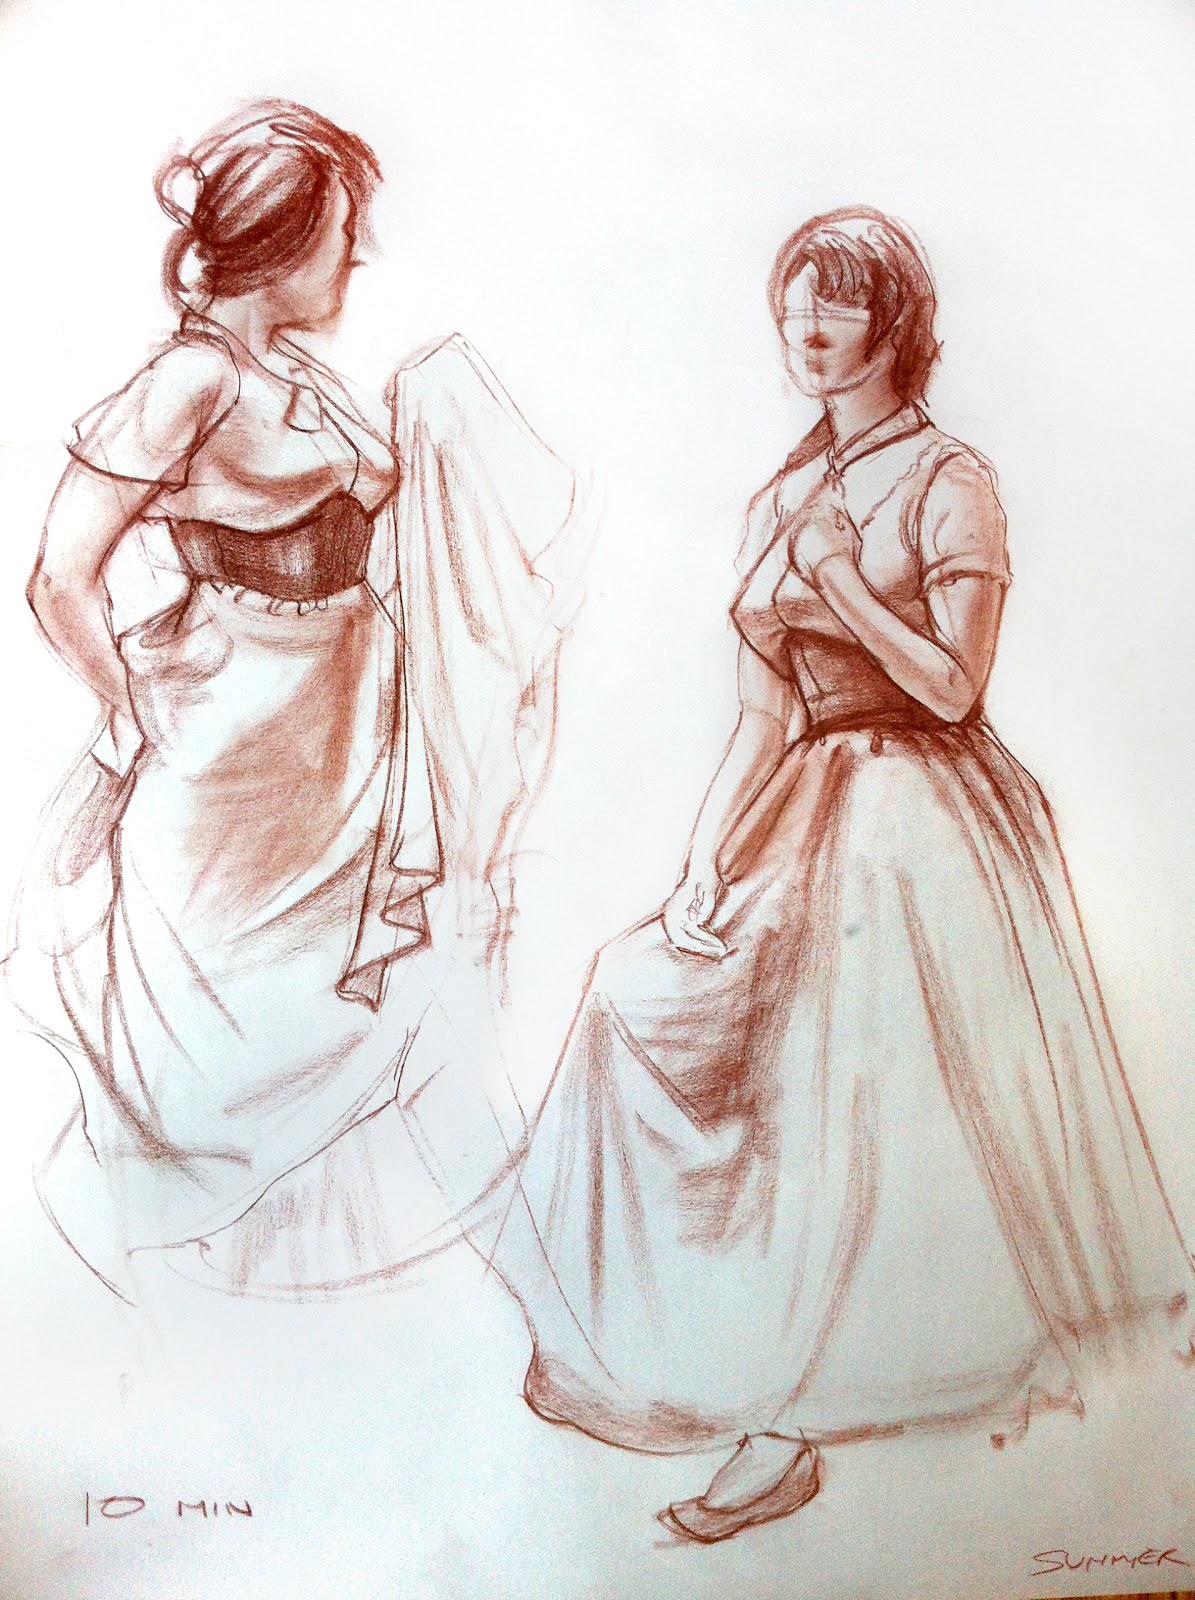 Art of Ian Jun Wei Chiew: Clothed Figure Drawings